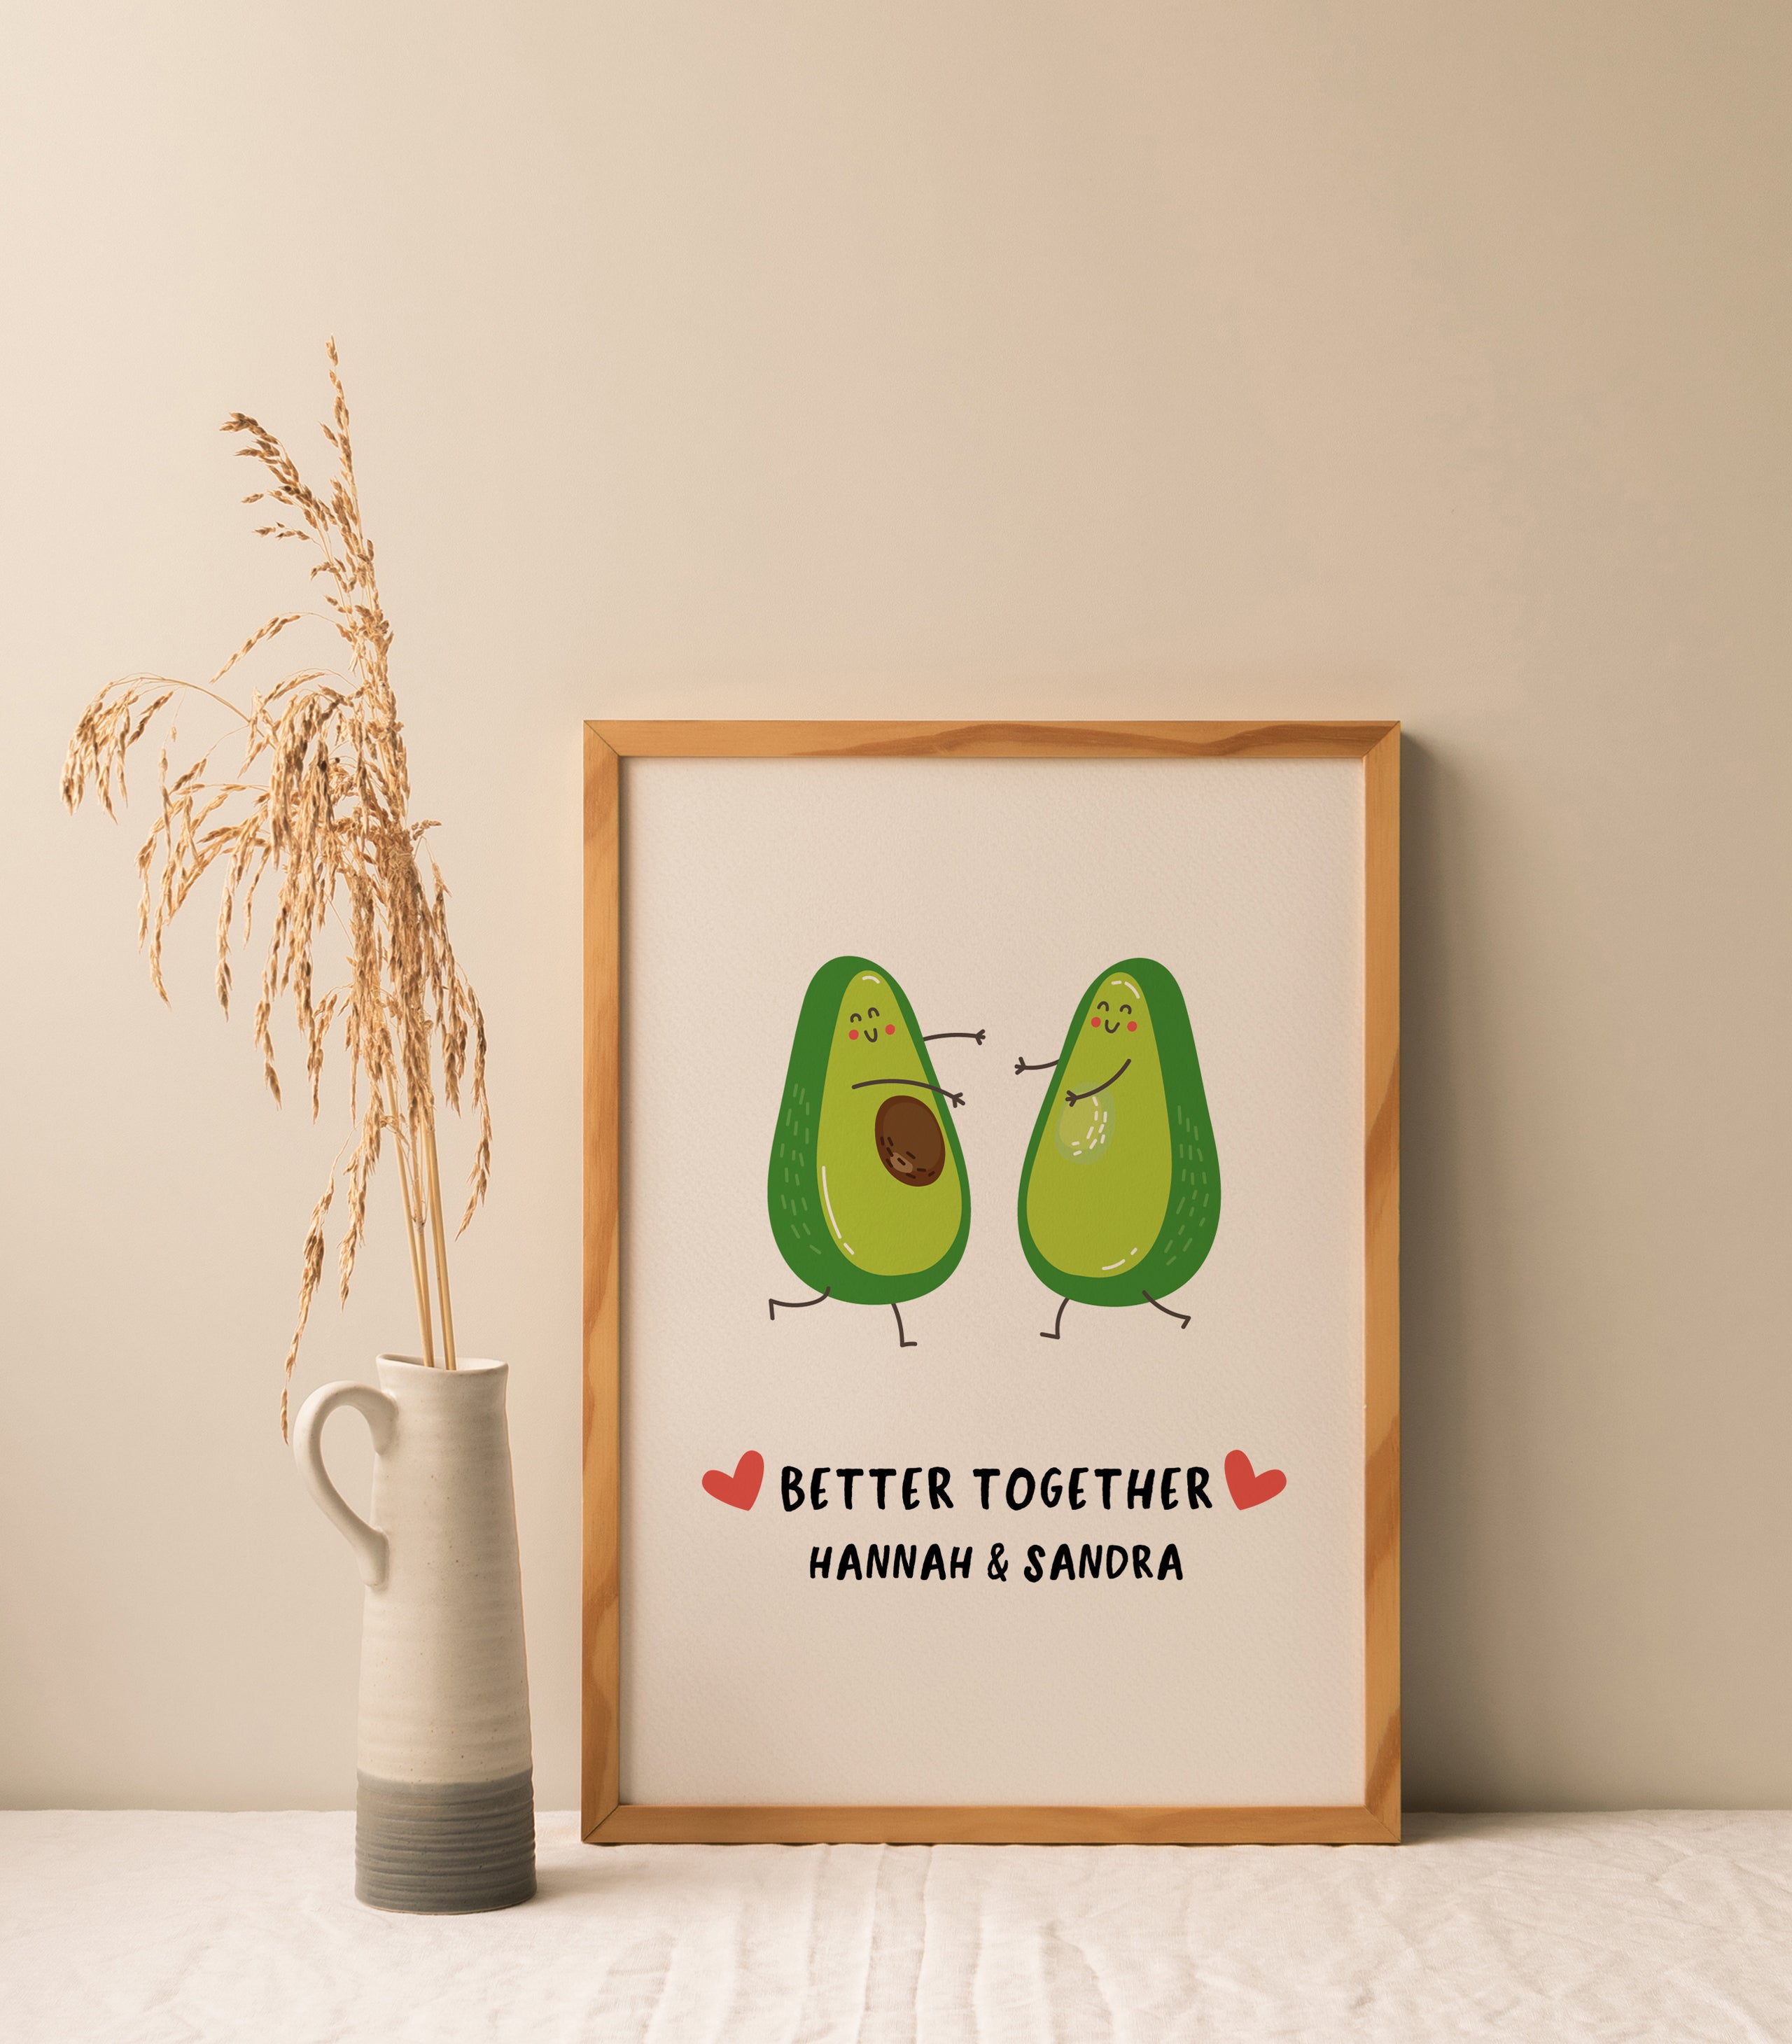 Better together - Avocado - Poster